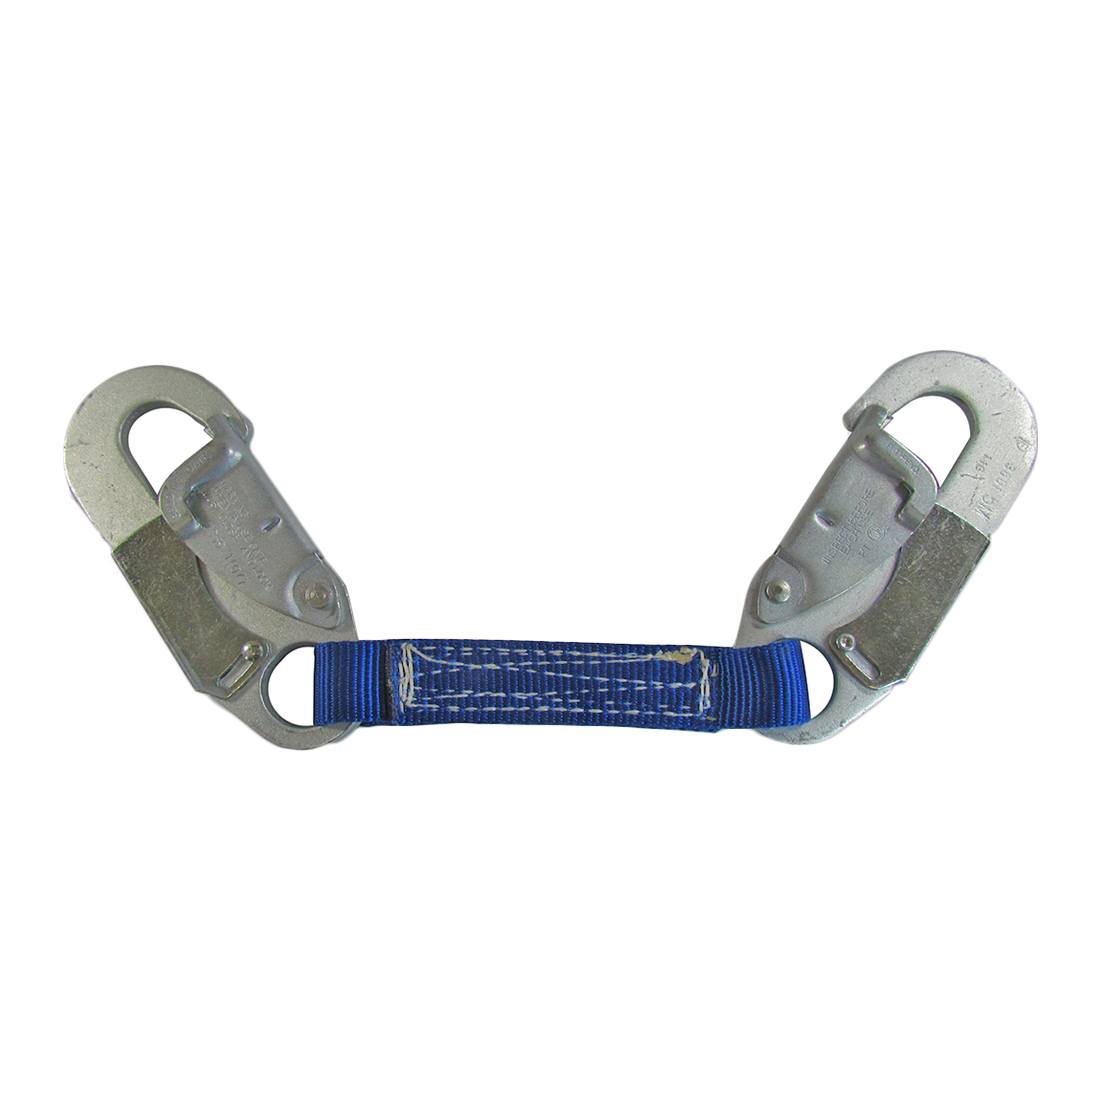 Sky Genie Non-Shock Absorbing Lanyard - 16 Inch - Main Product View